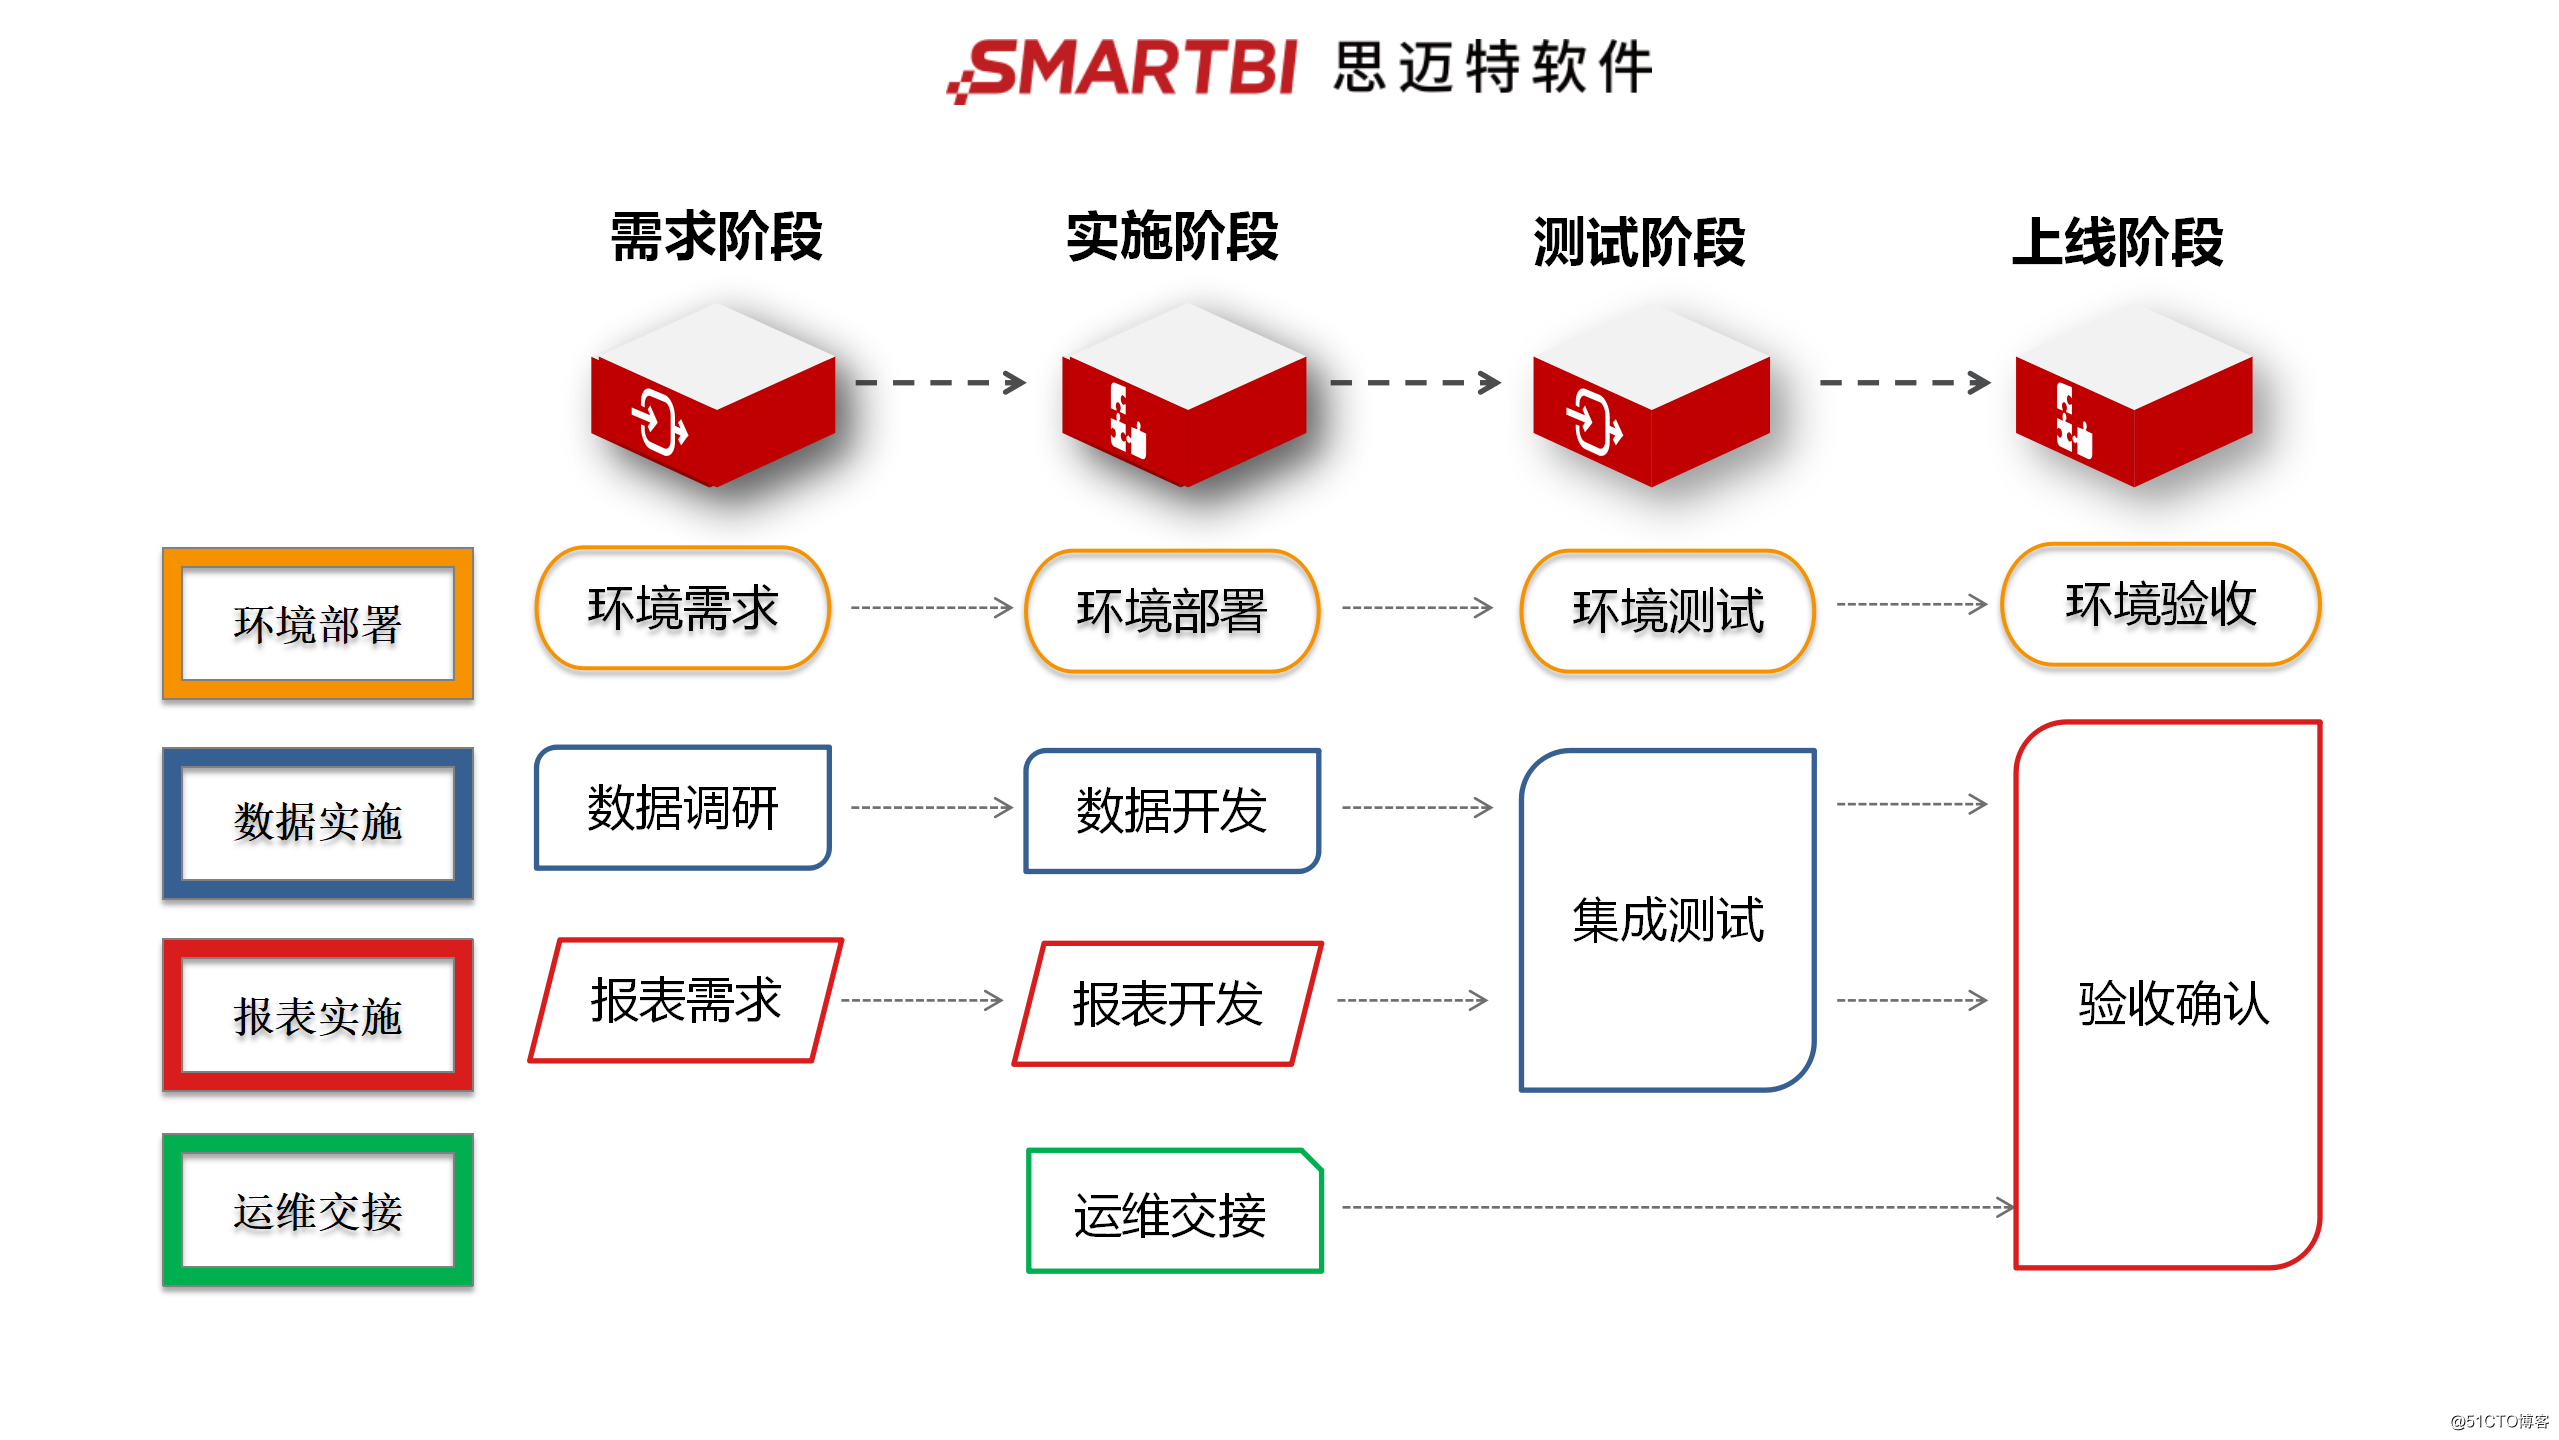 Smartbi teaches you how to do a good job on demand, taking the first step in the construction of a reporting platform!